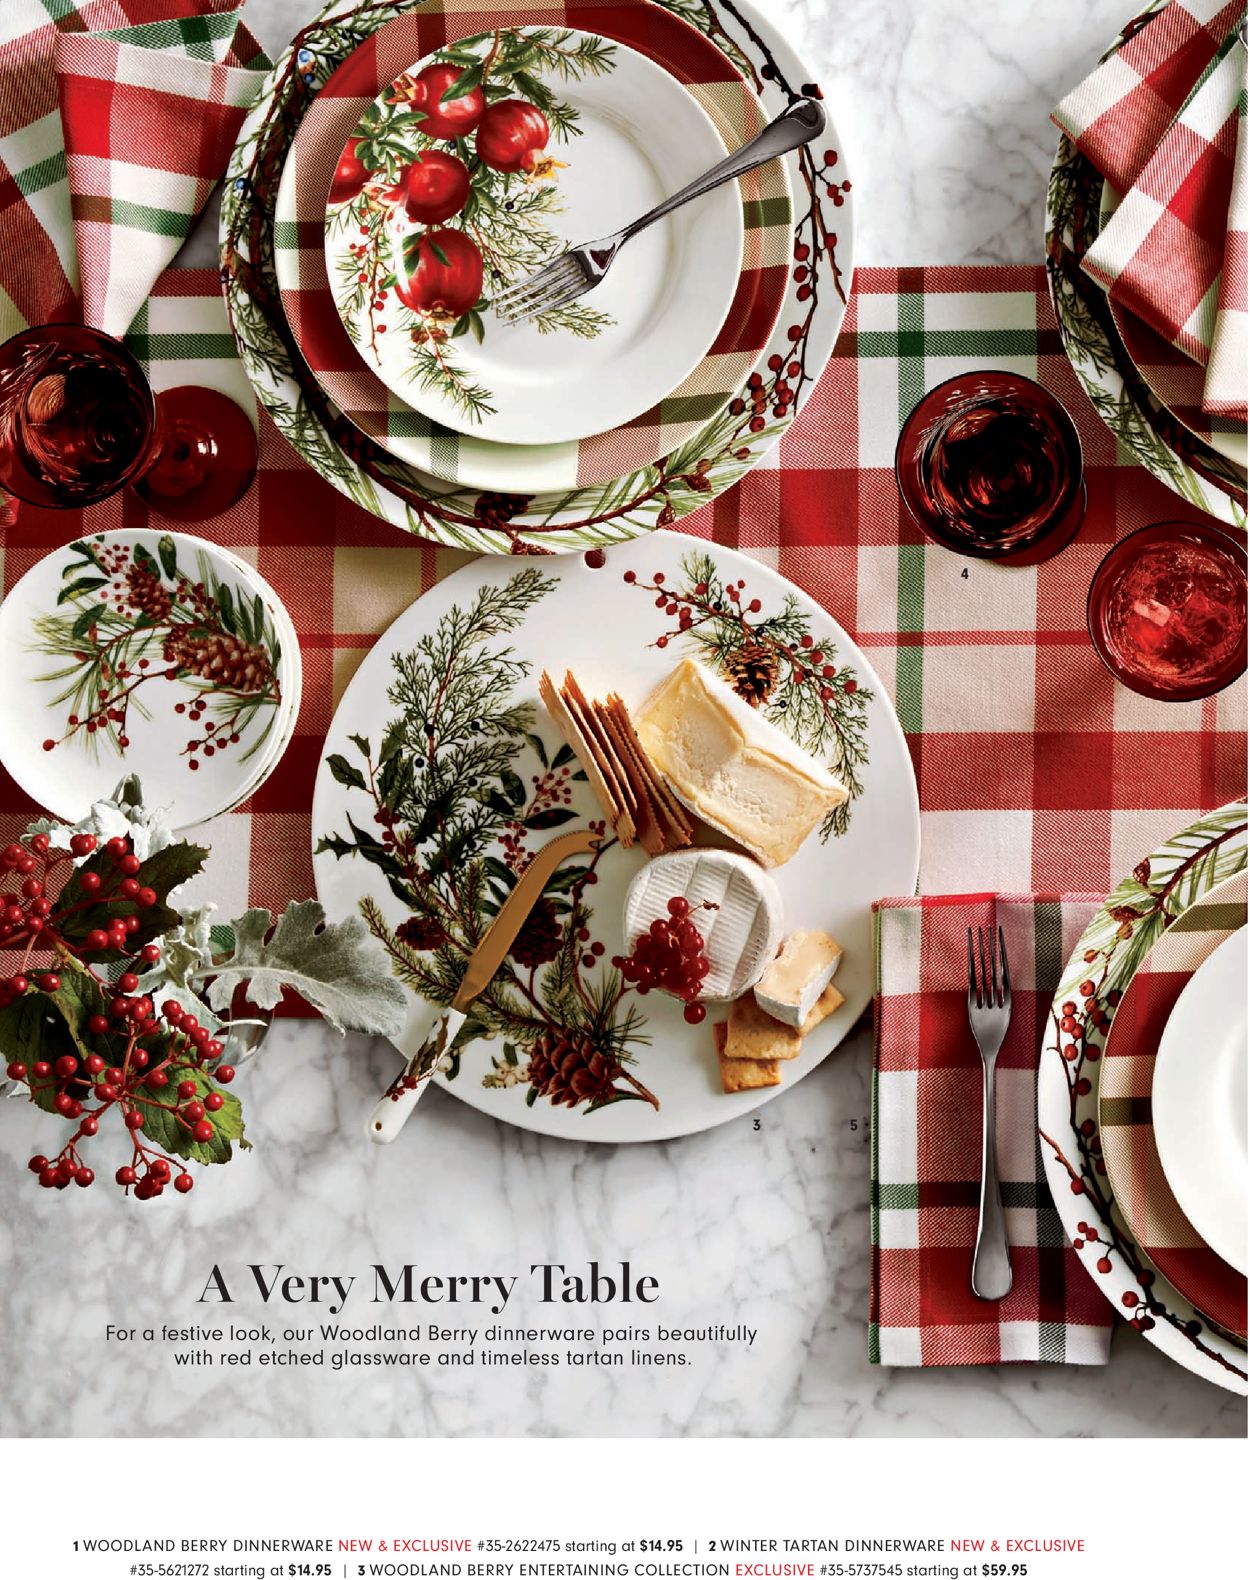 WilliamsSonoma Christmas 2020 Current weekly ad 11/26 12/31/2020 [64